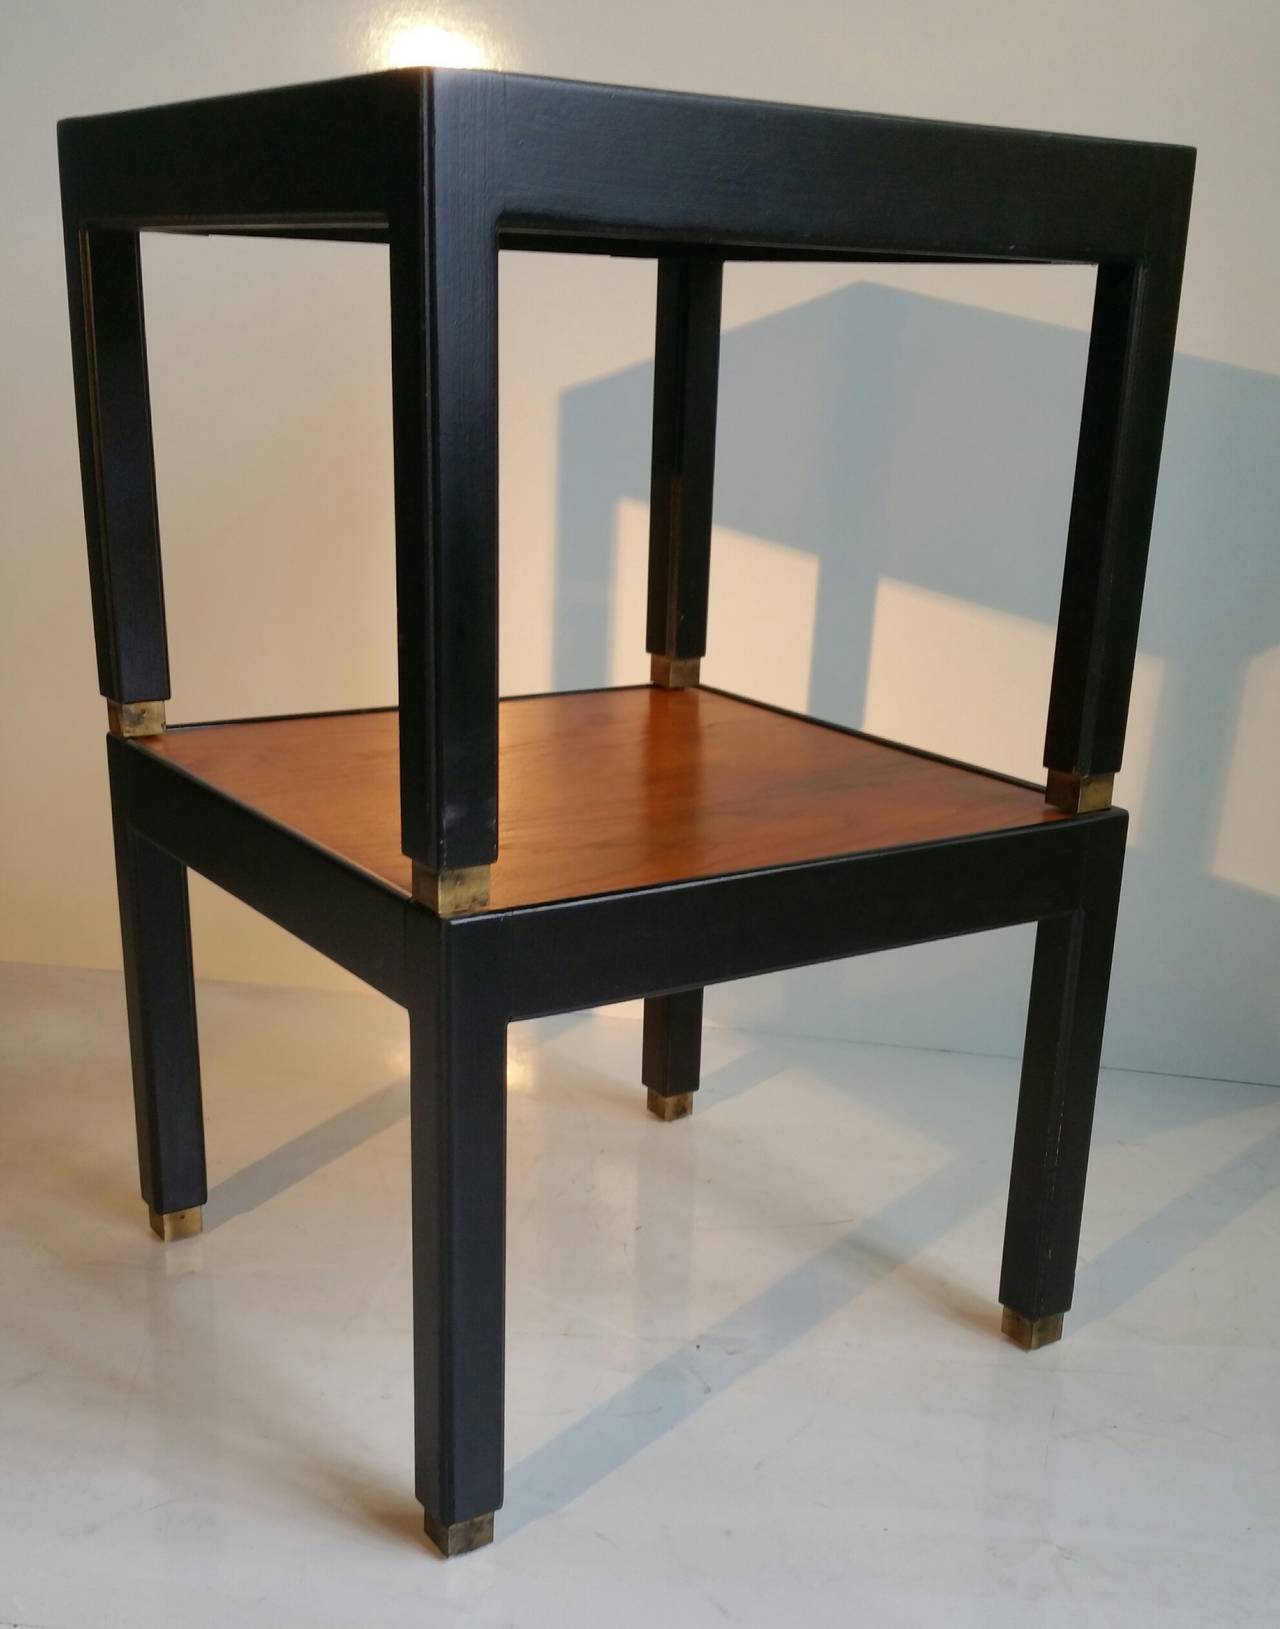 Pair of Modernist Black Lacquer and Walnut Side Tables or Stands 1